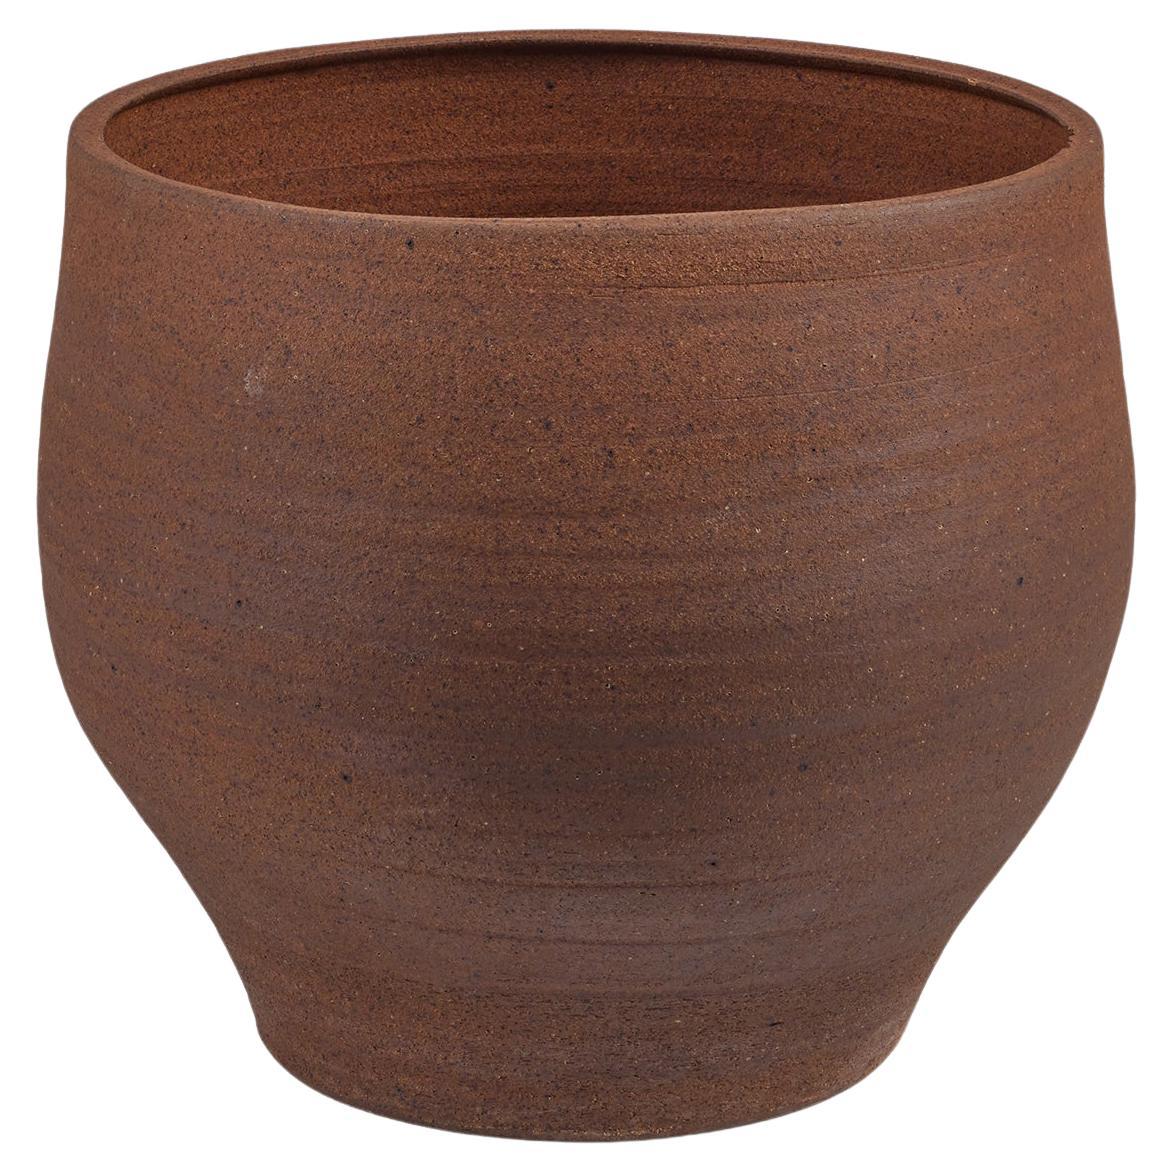 John Follis Hand Thrown Stoneware Bell Planter for Architectural Pottery For Sale